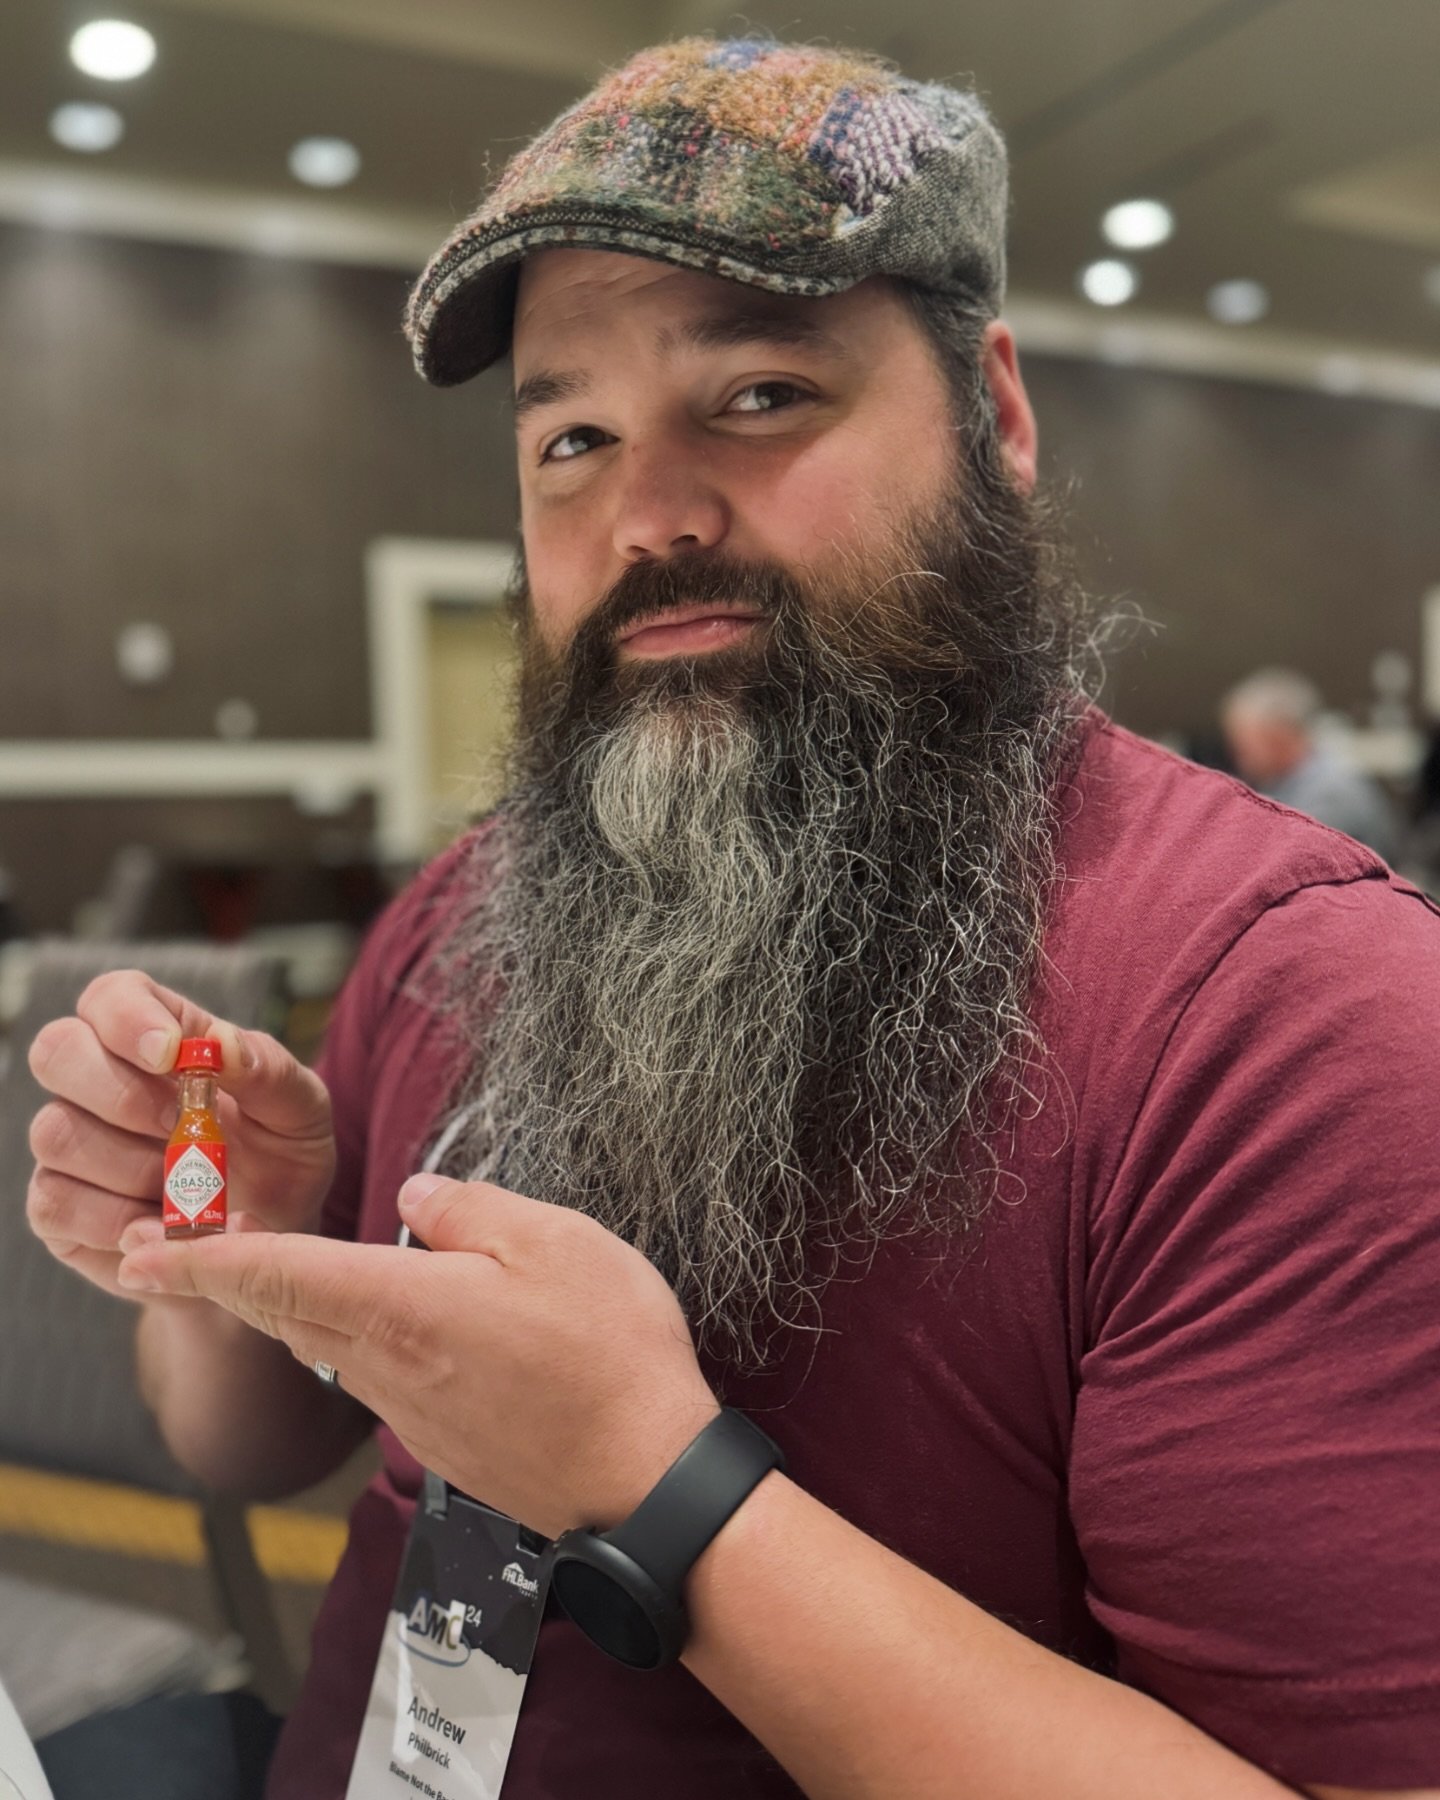 Here&rsquo;s Andrew with a tiny Tabasco to remind you that we have some GREAT shows coming up this month! 

May 4-5 at @visitamanacolonies for Maifest - Amana, IA
May 8 at Opus Concert Cafe - Cedar Rapids, IA
May 10 at @ravenwolfproductions - William